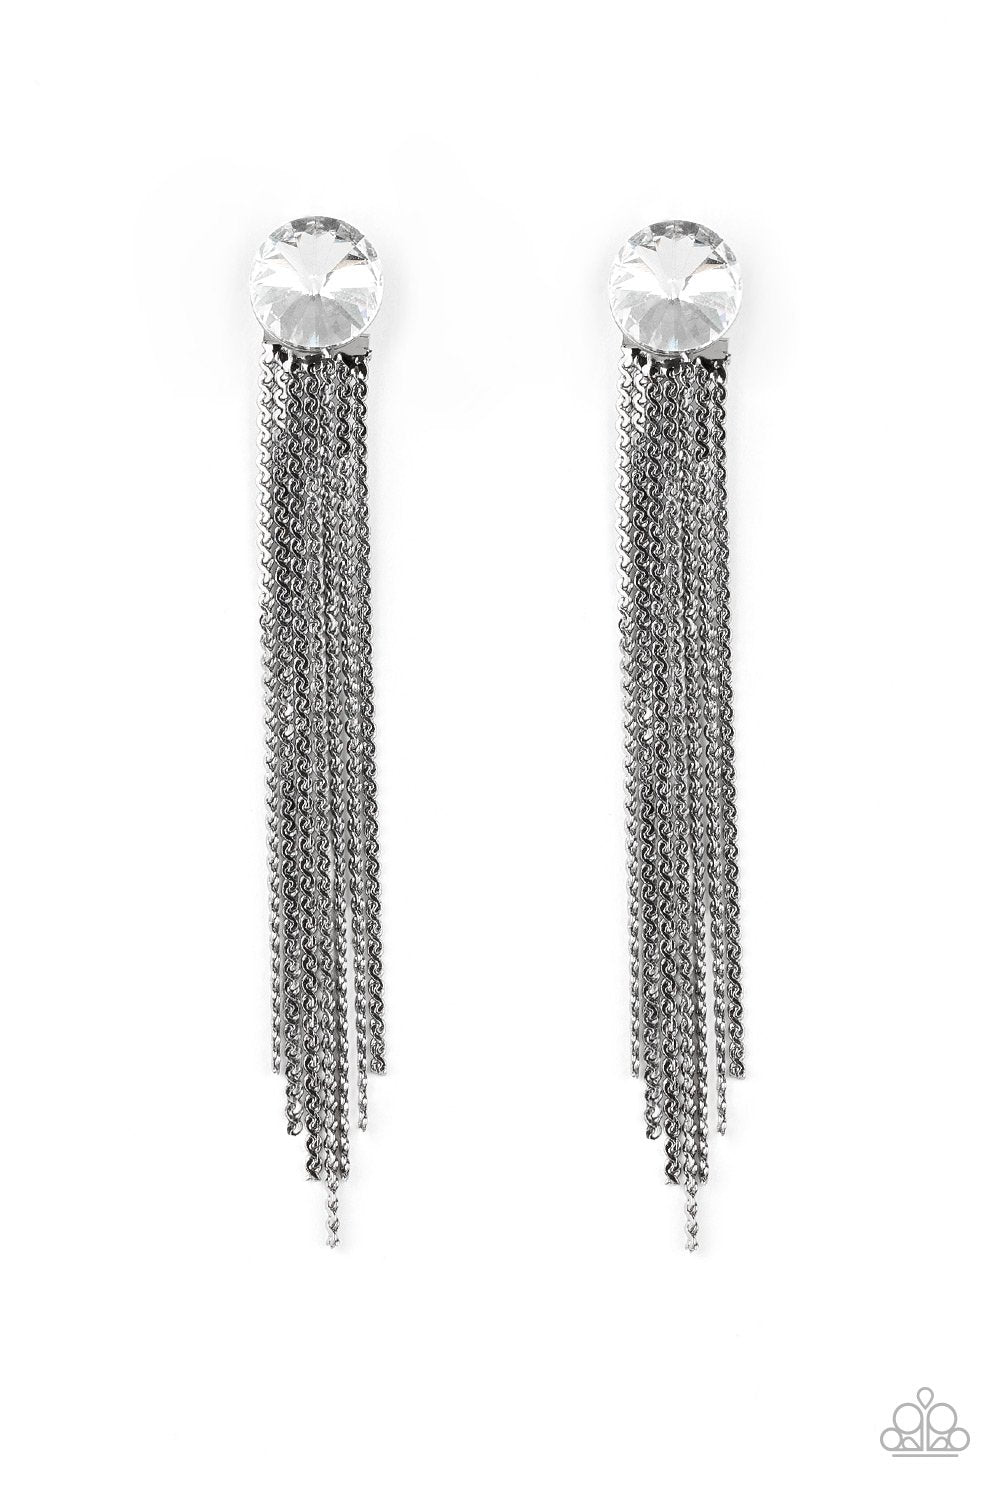 Level Up Gunmetal Black Chain and White Rhinestone Earrings - Paparazzi Accessories-CarasShop.com - $5 Jewelry by Cara Jewels